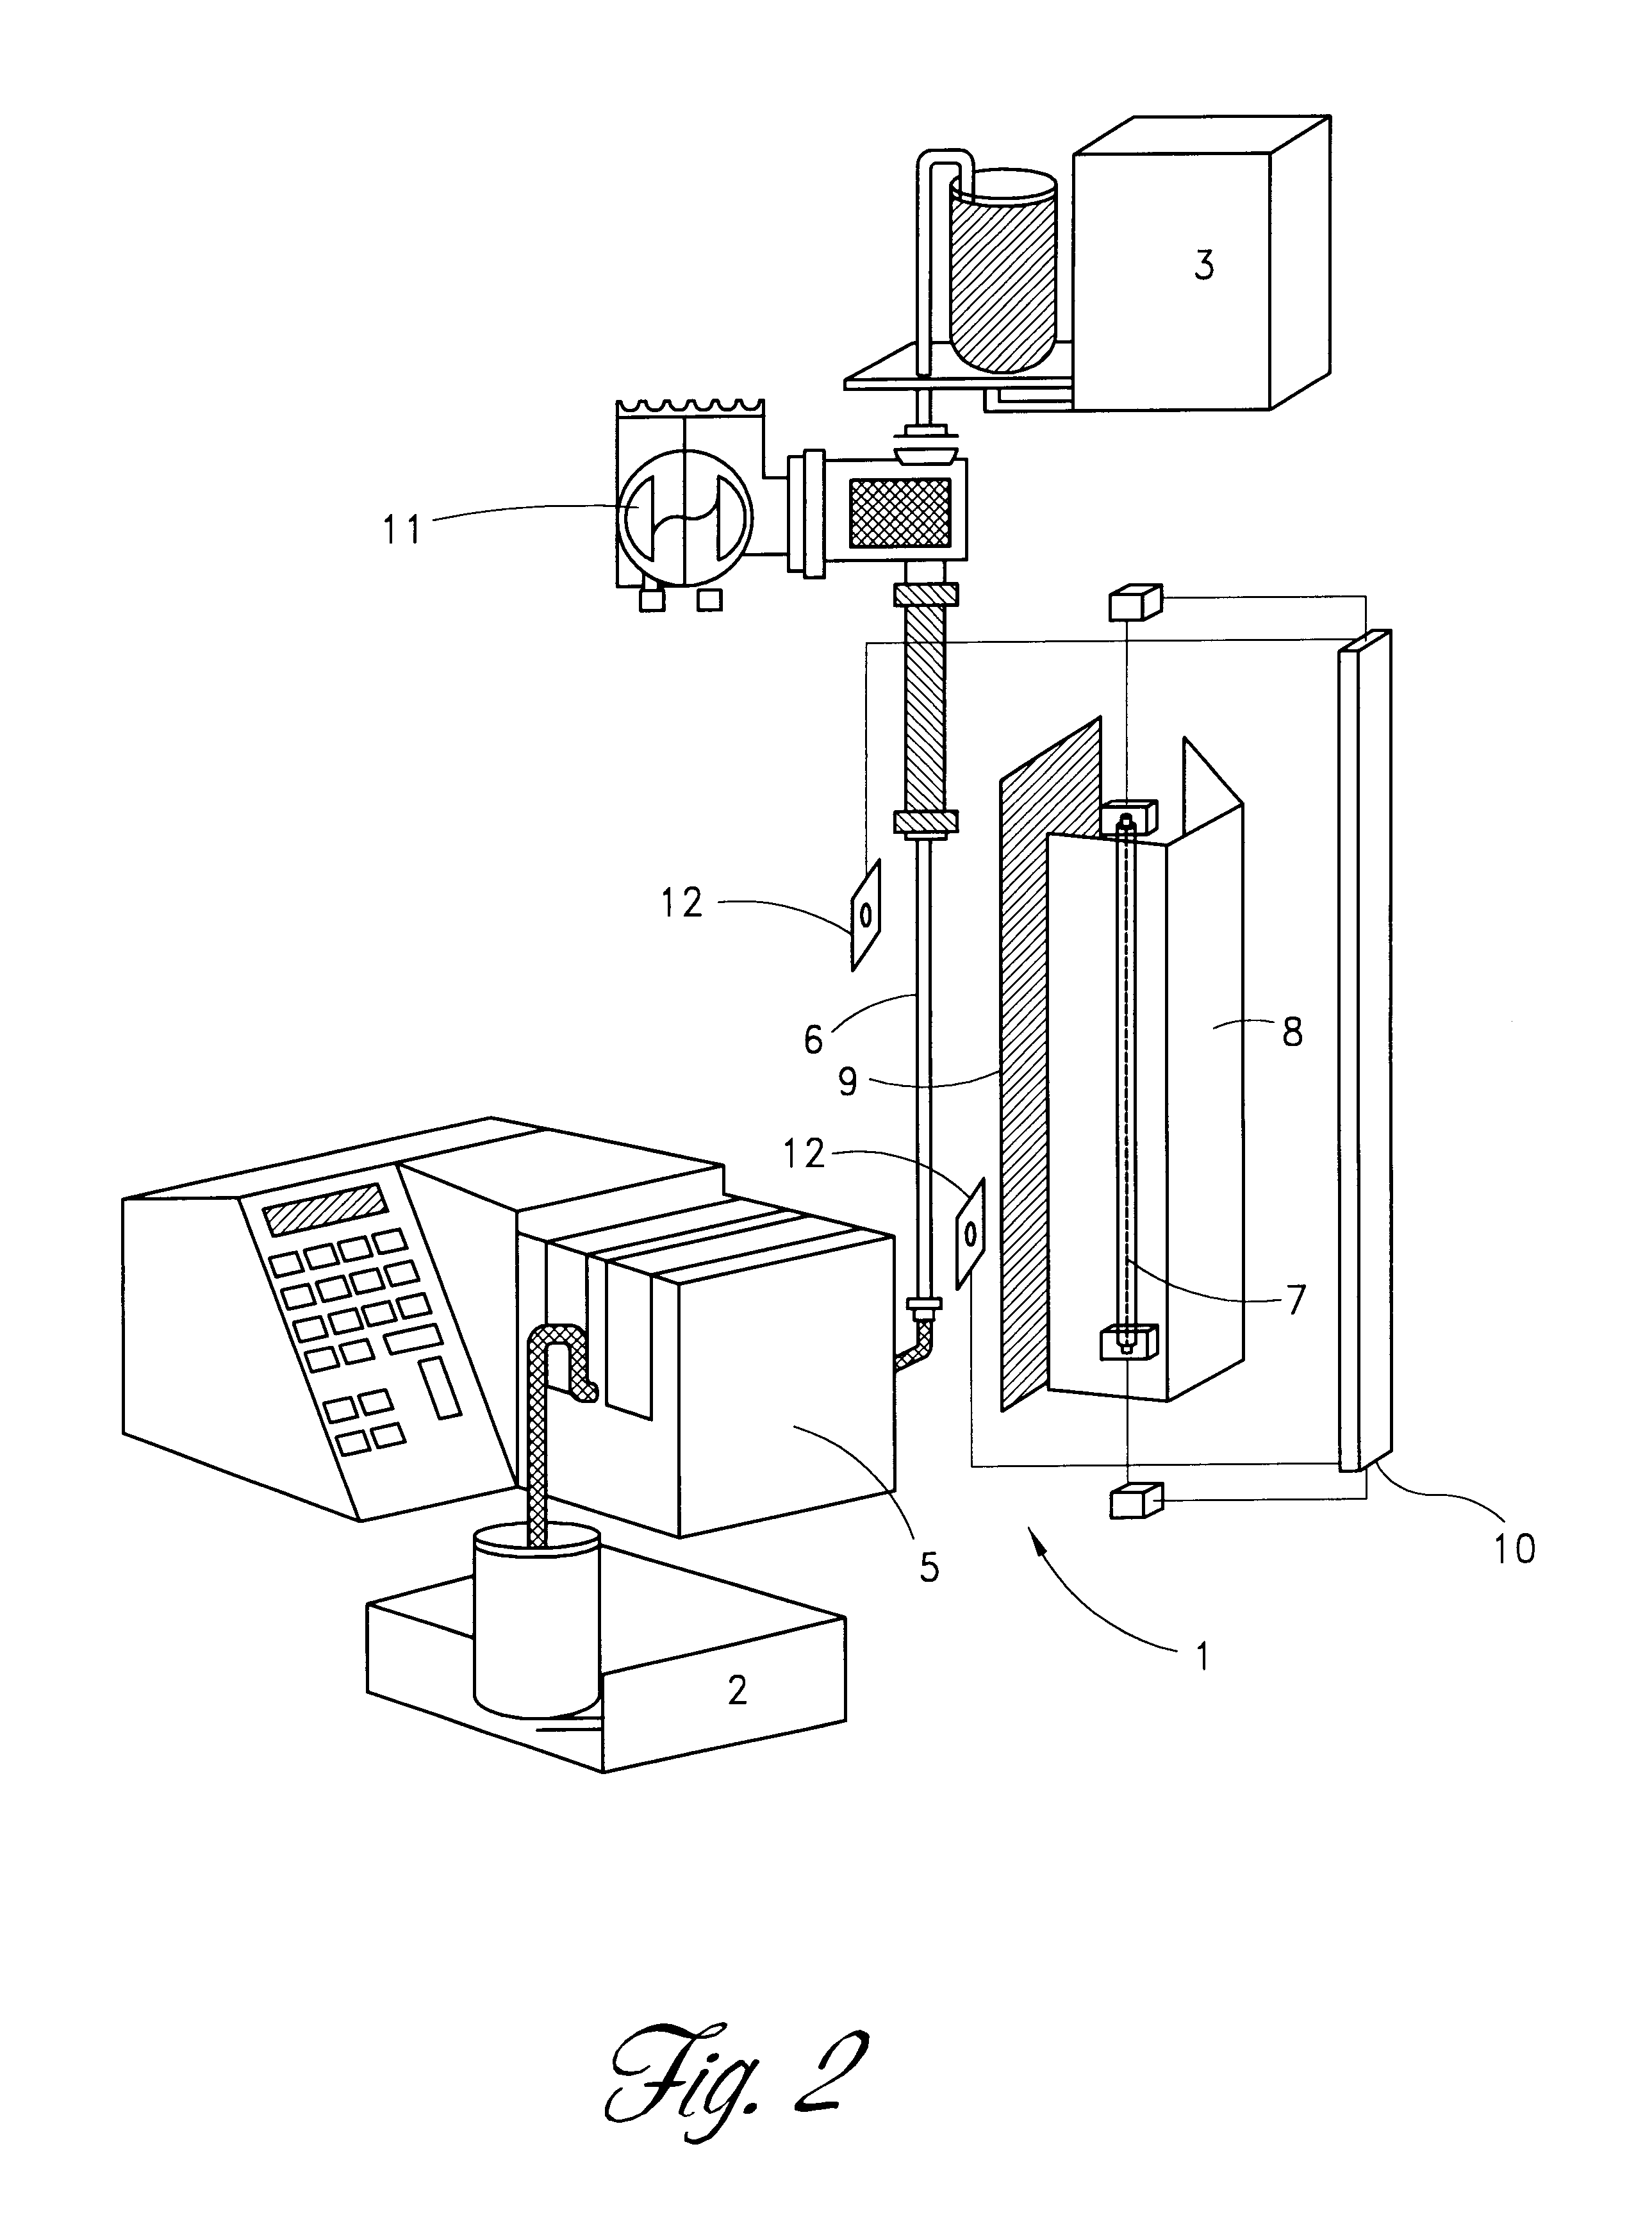 Method and apparatus for inactivating contaminants in blood products